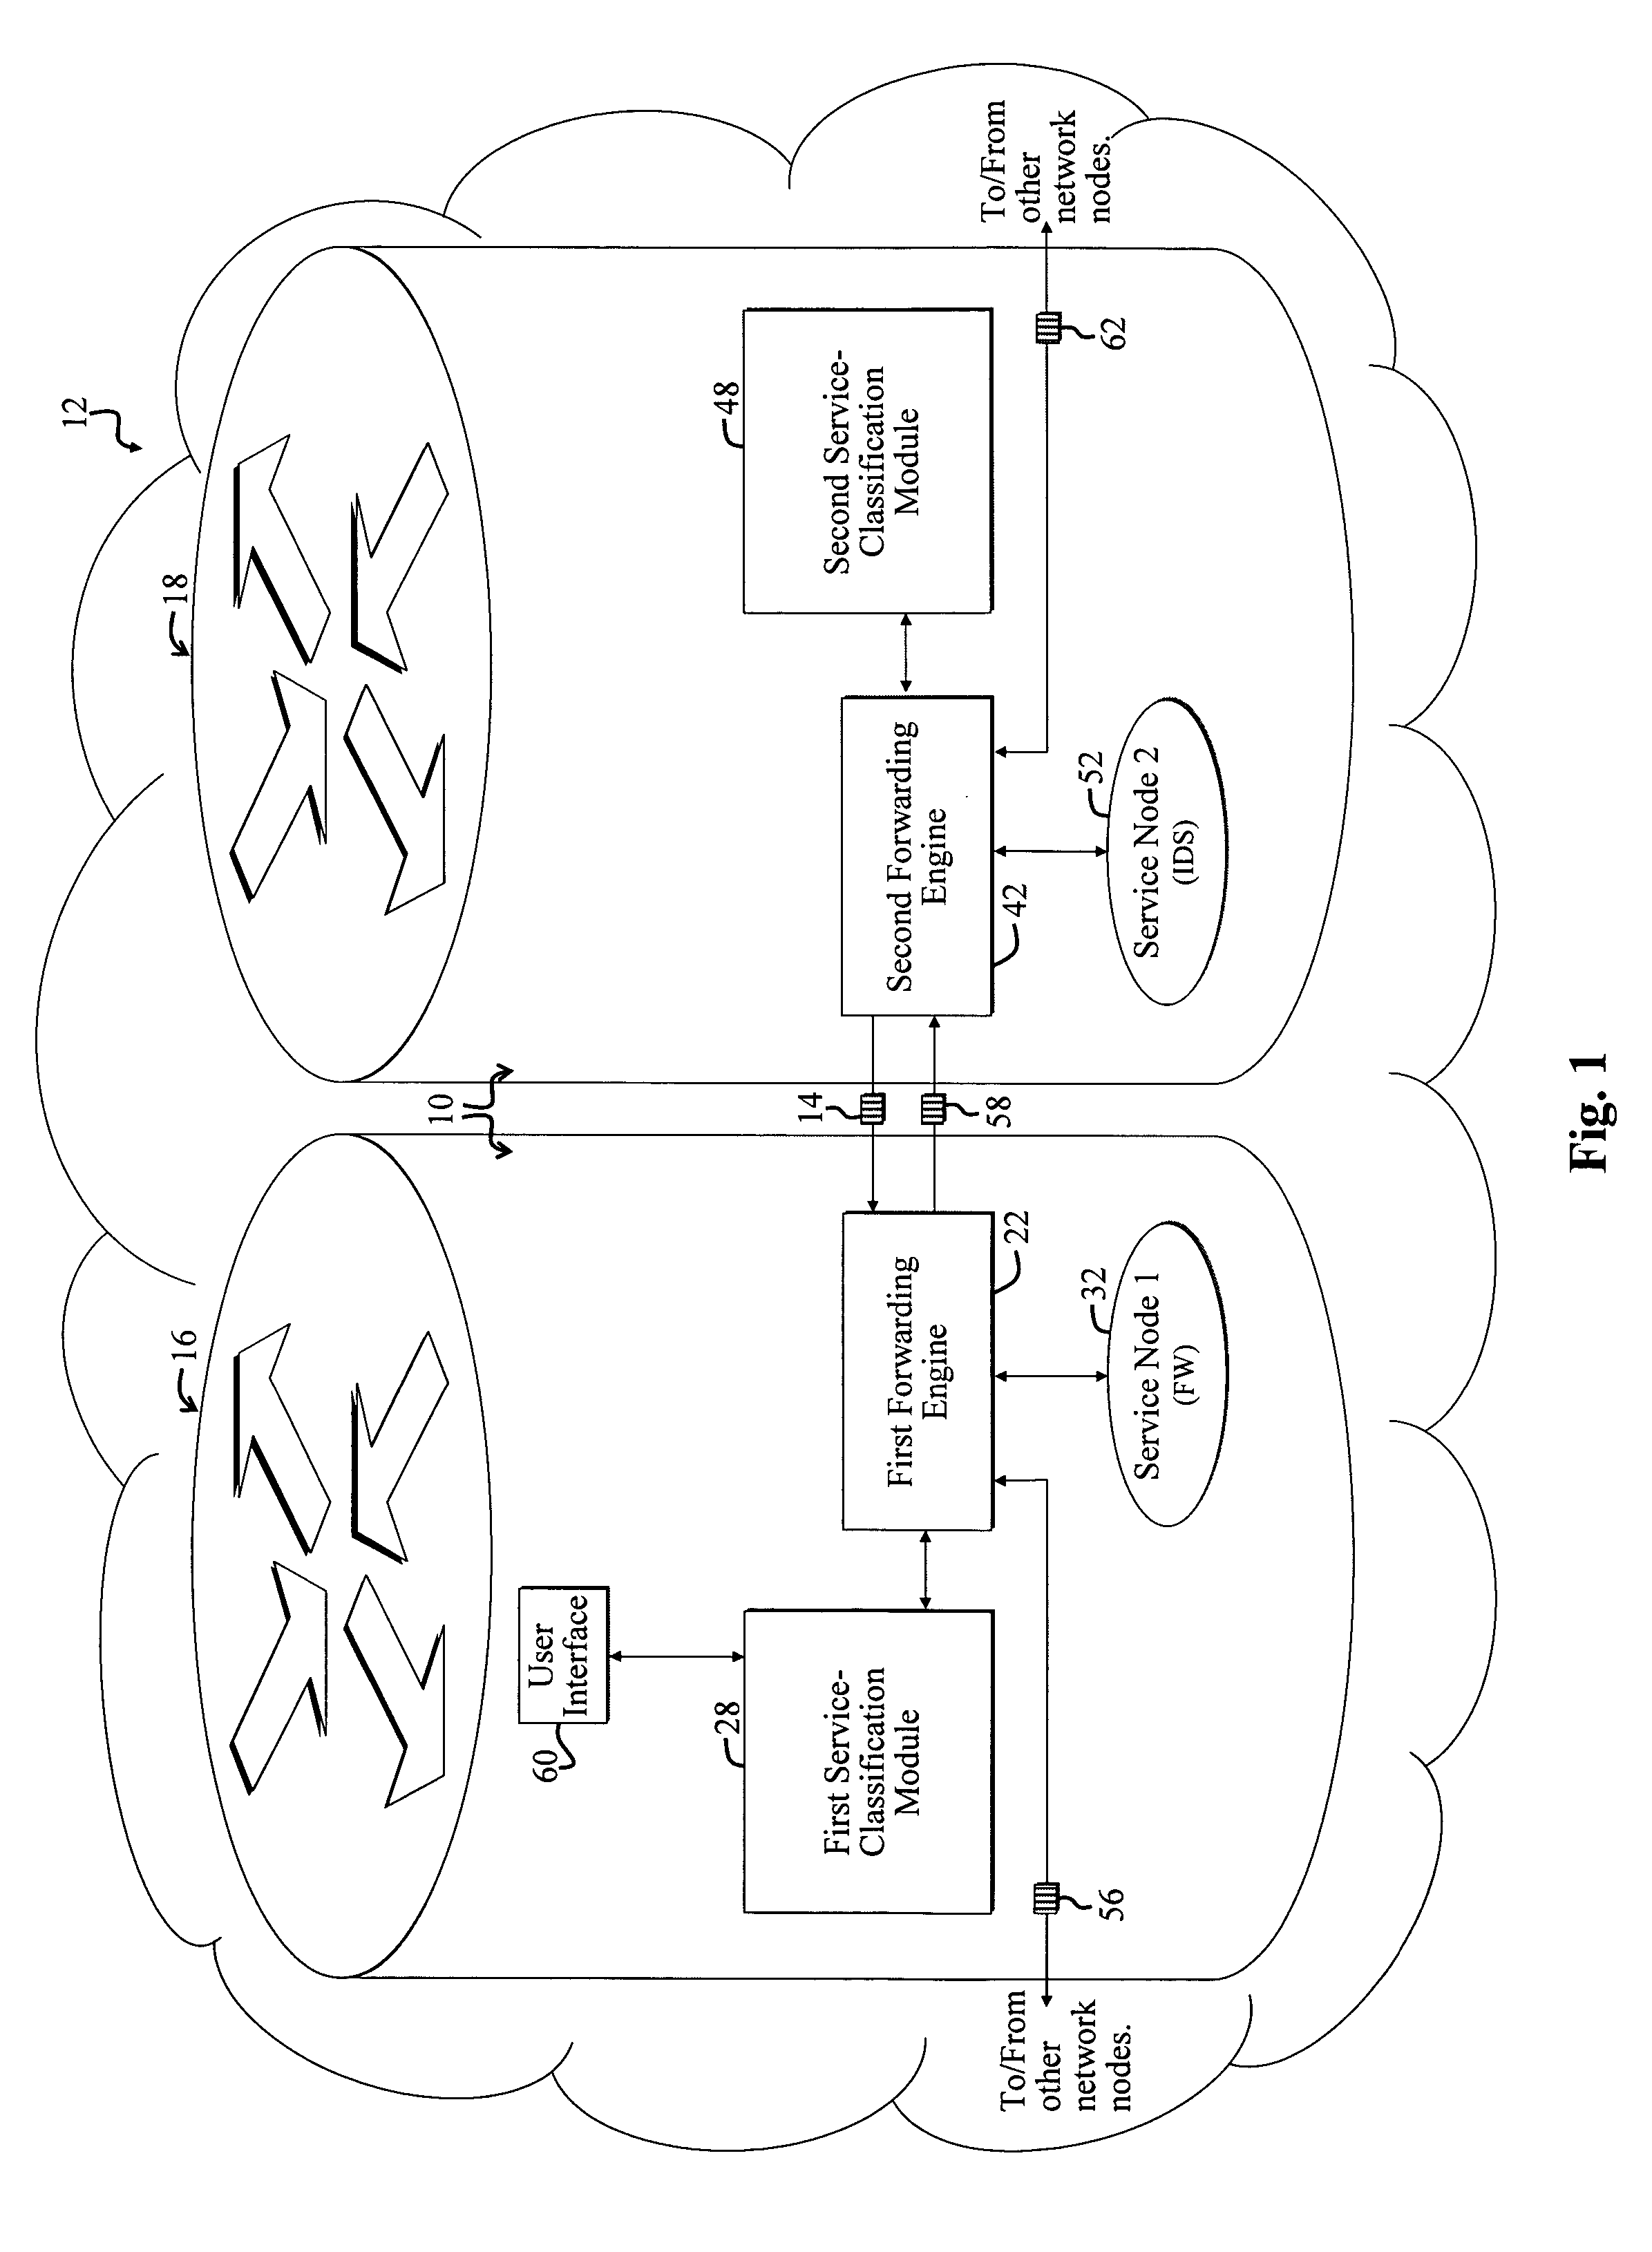 System and method for selectively applying a service to a network packet using a preexisting packet header